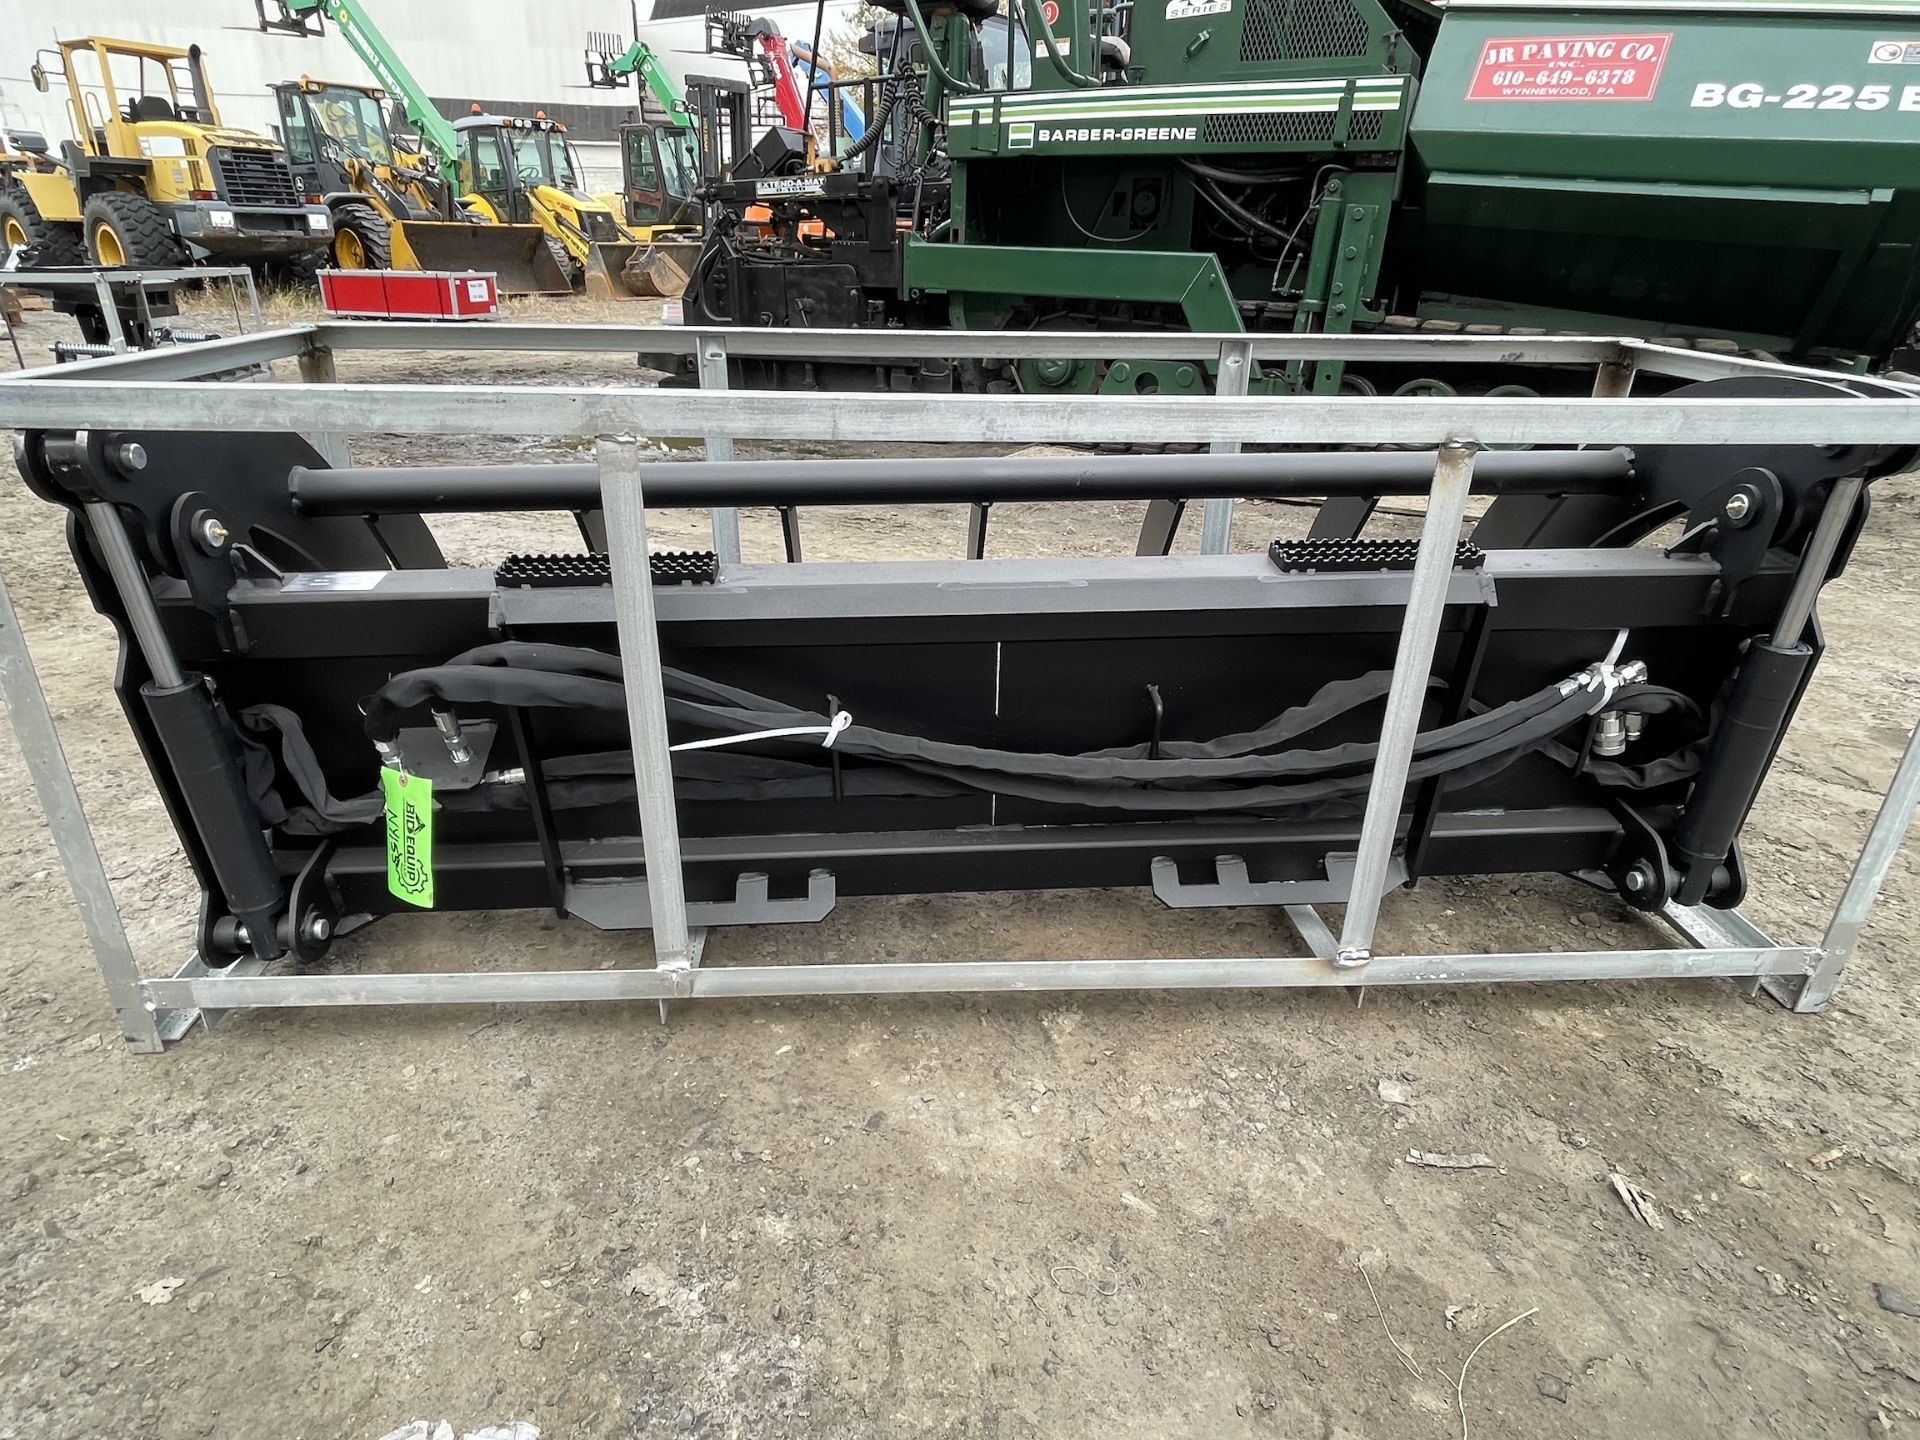 Brand New Greatbear Heavy Grass Fork Grapple Skid Steer Attachment (NY155) - Image 3 of 10